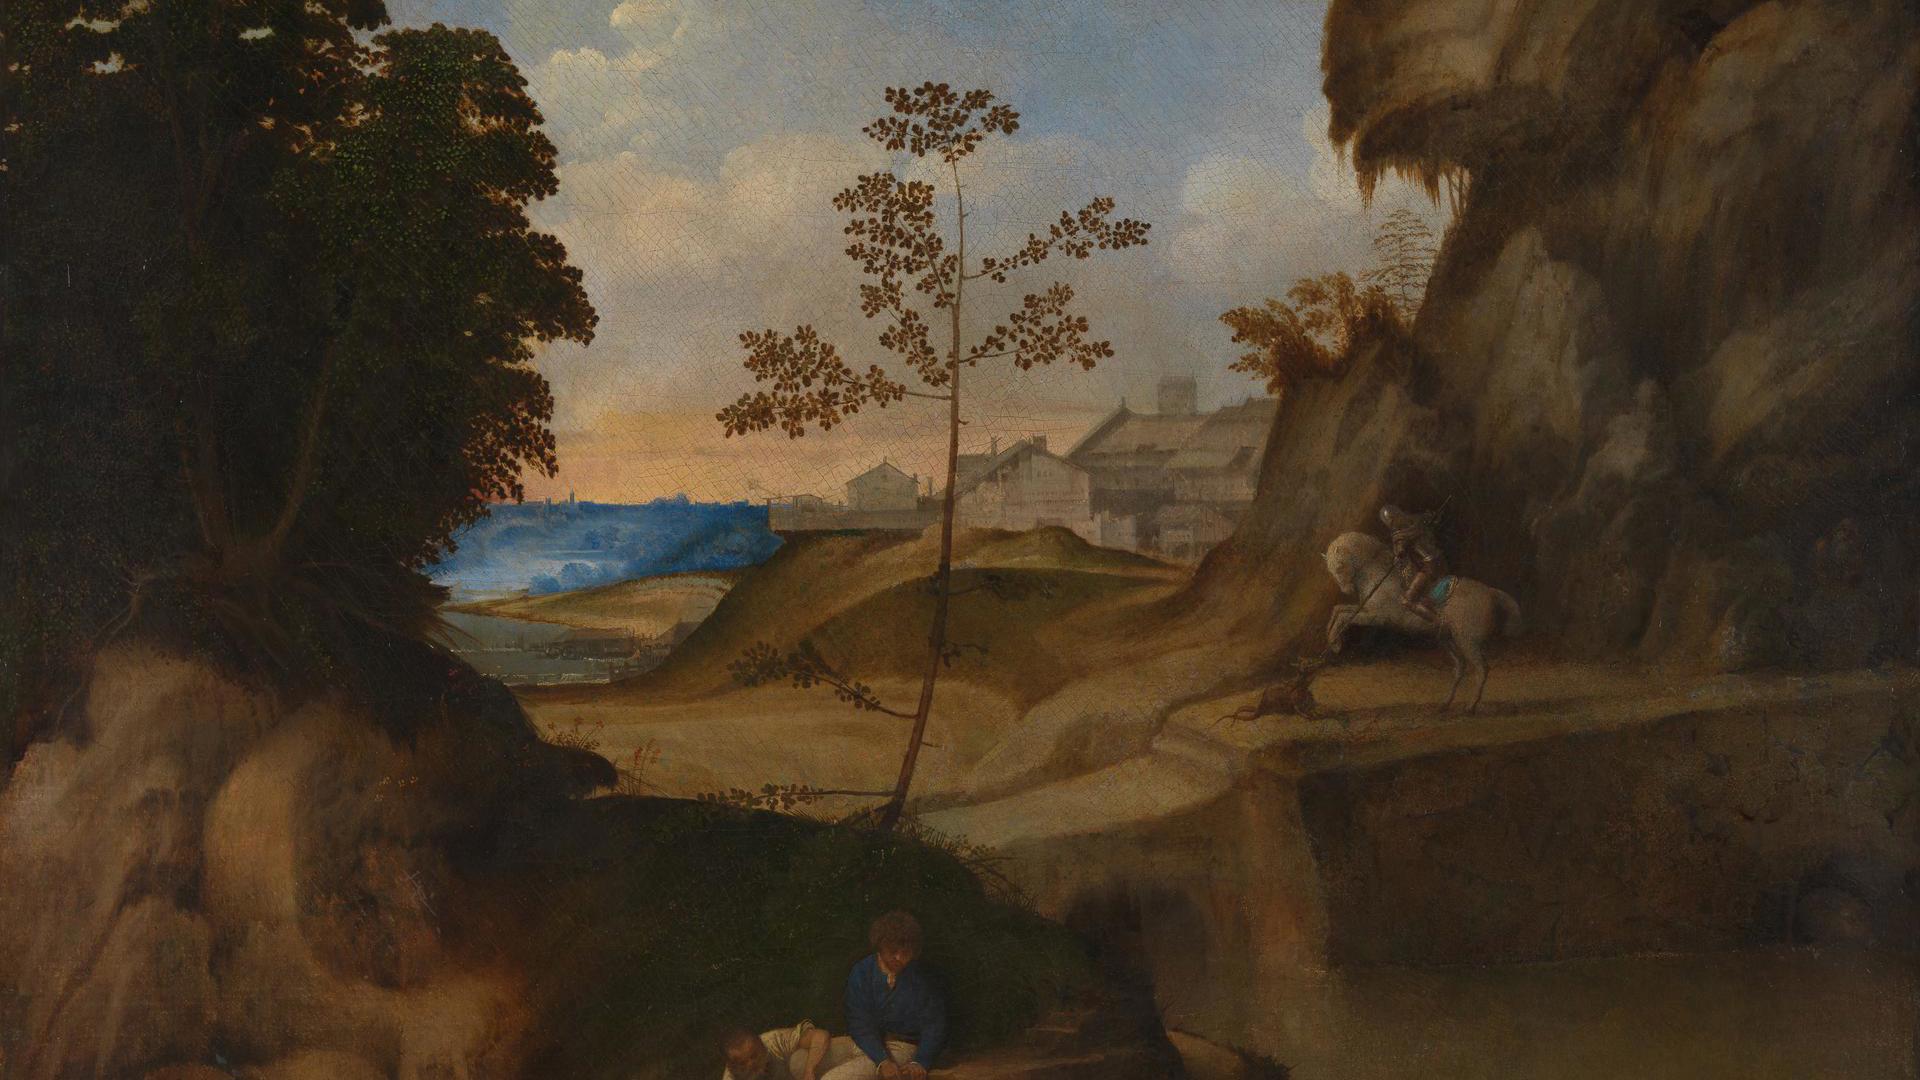 Il Tramonto (The Sunset) by Giorgione